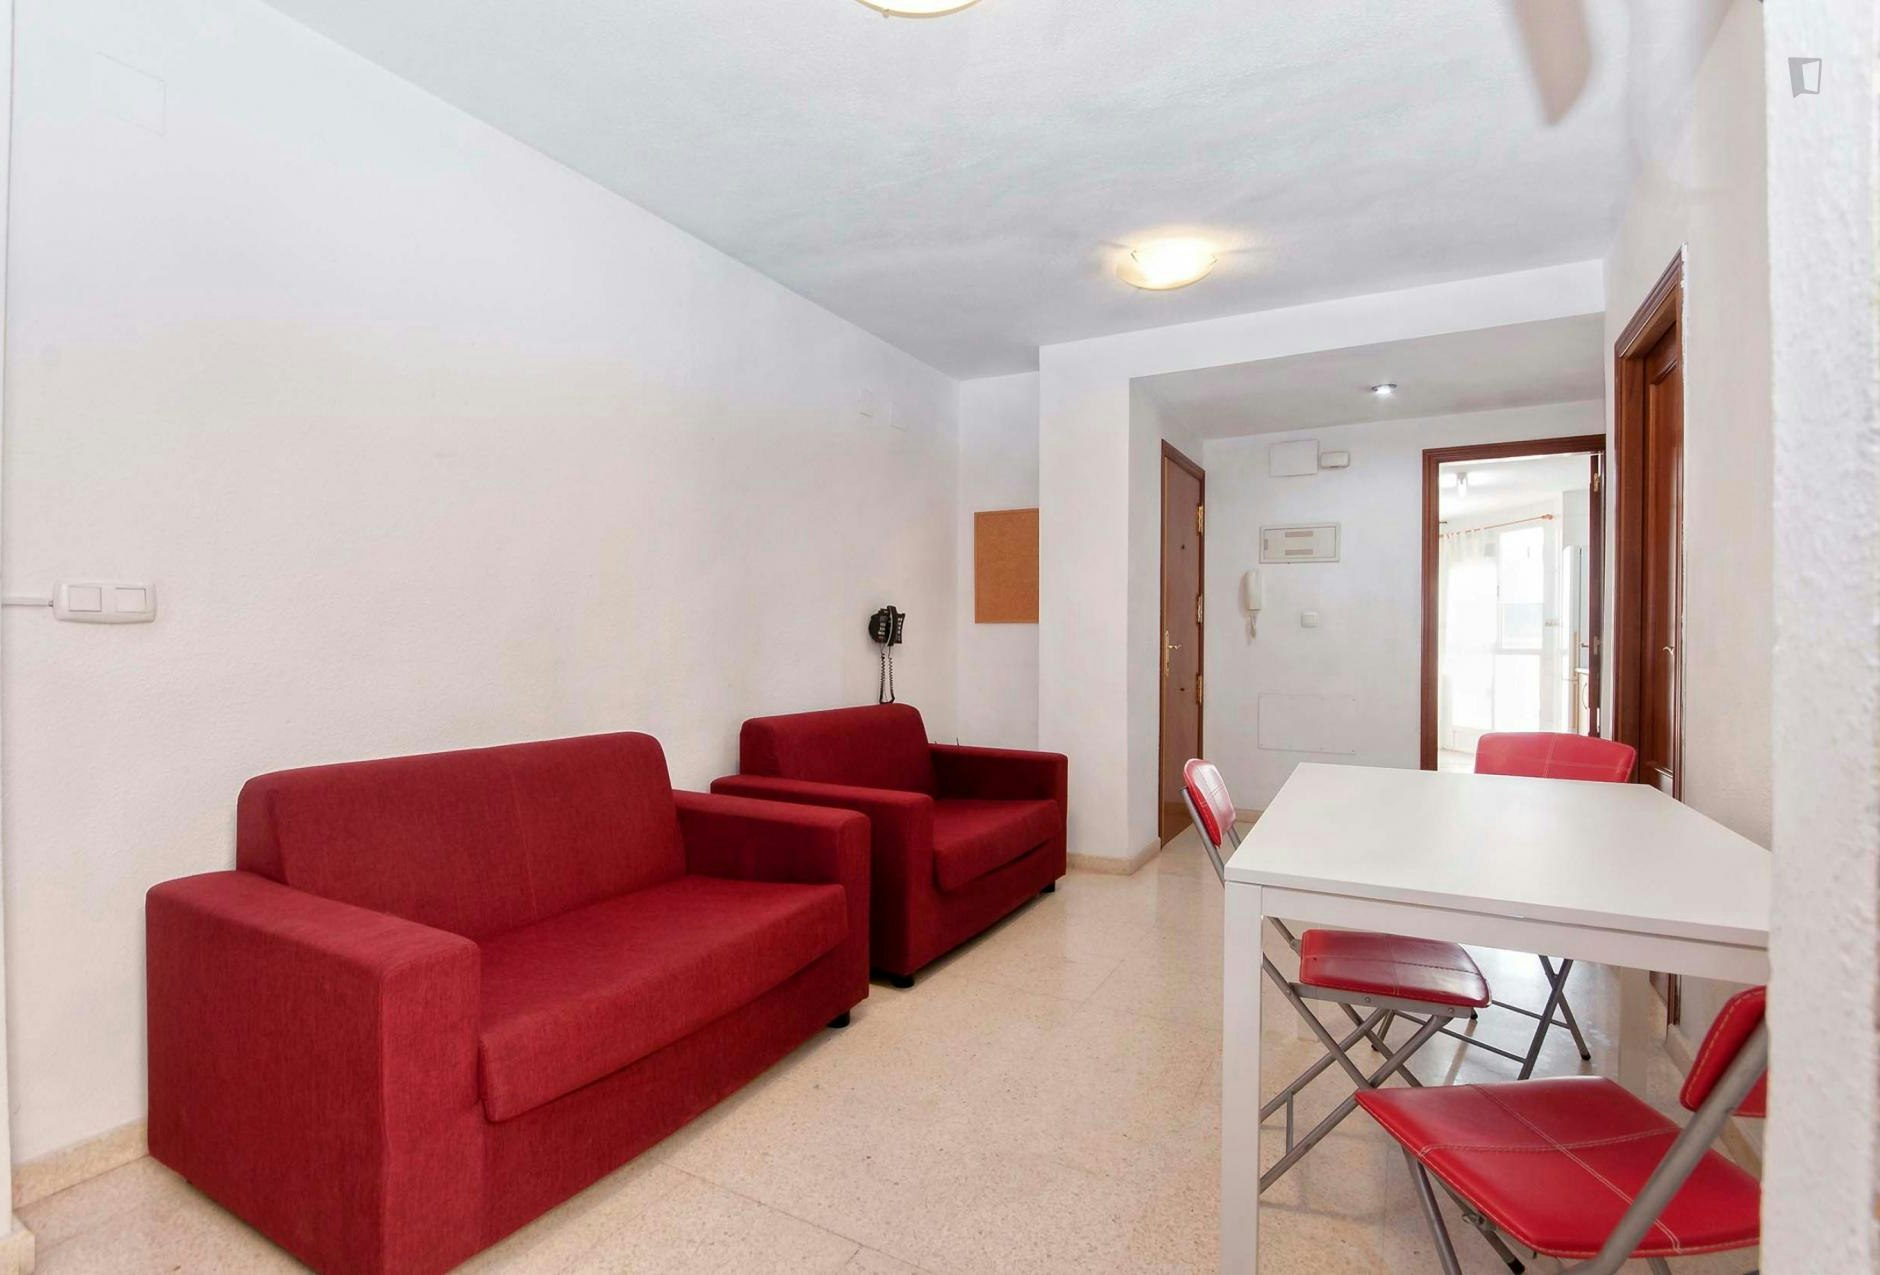 Double bedroom in a 6-bedroom apartment not far from Marq - Castillo train station